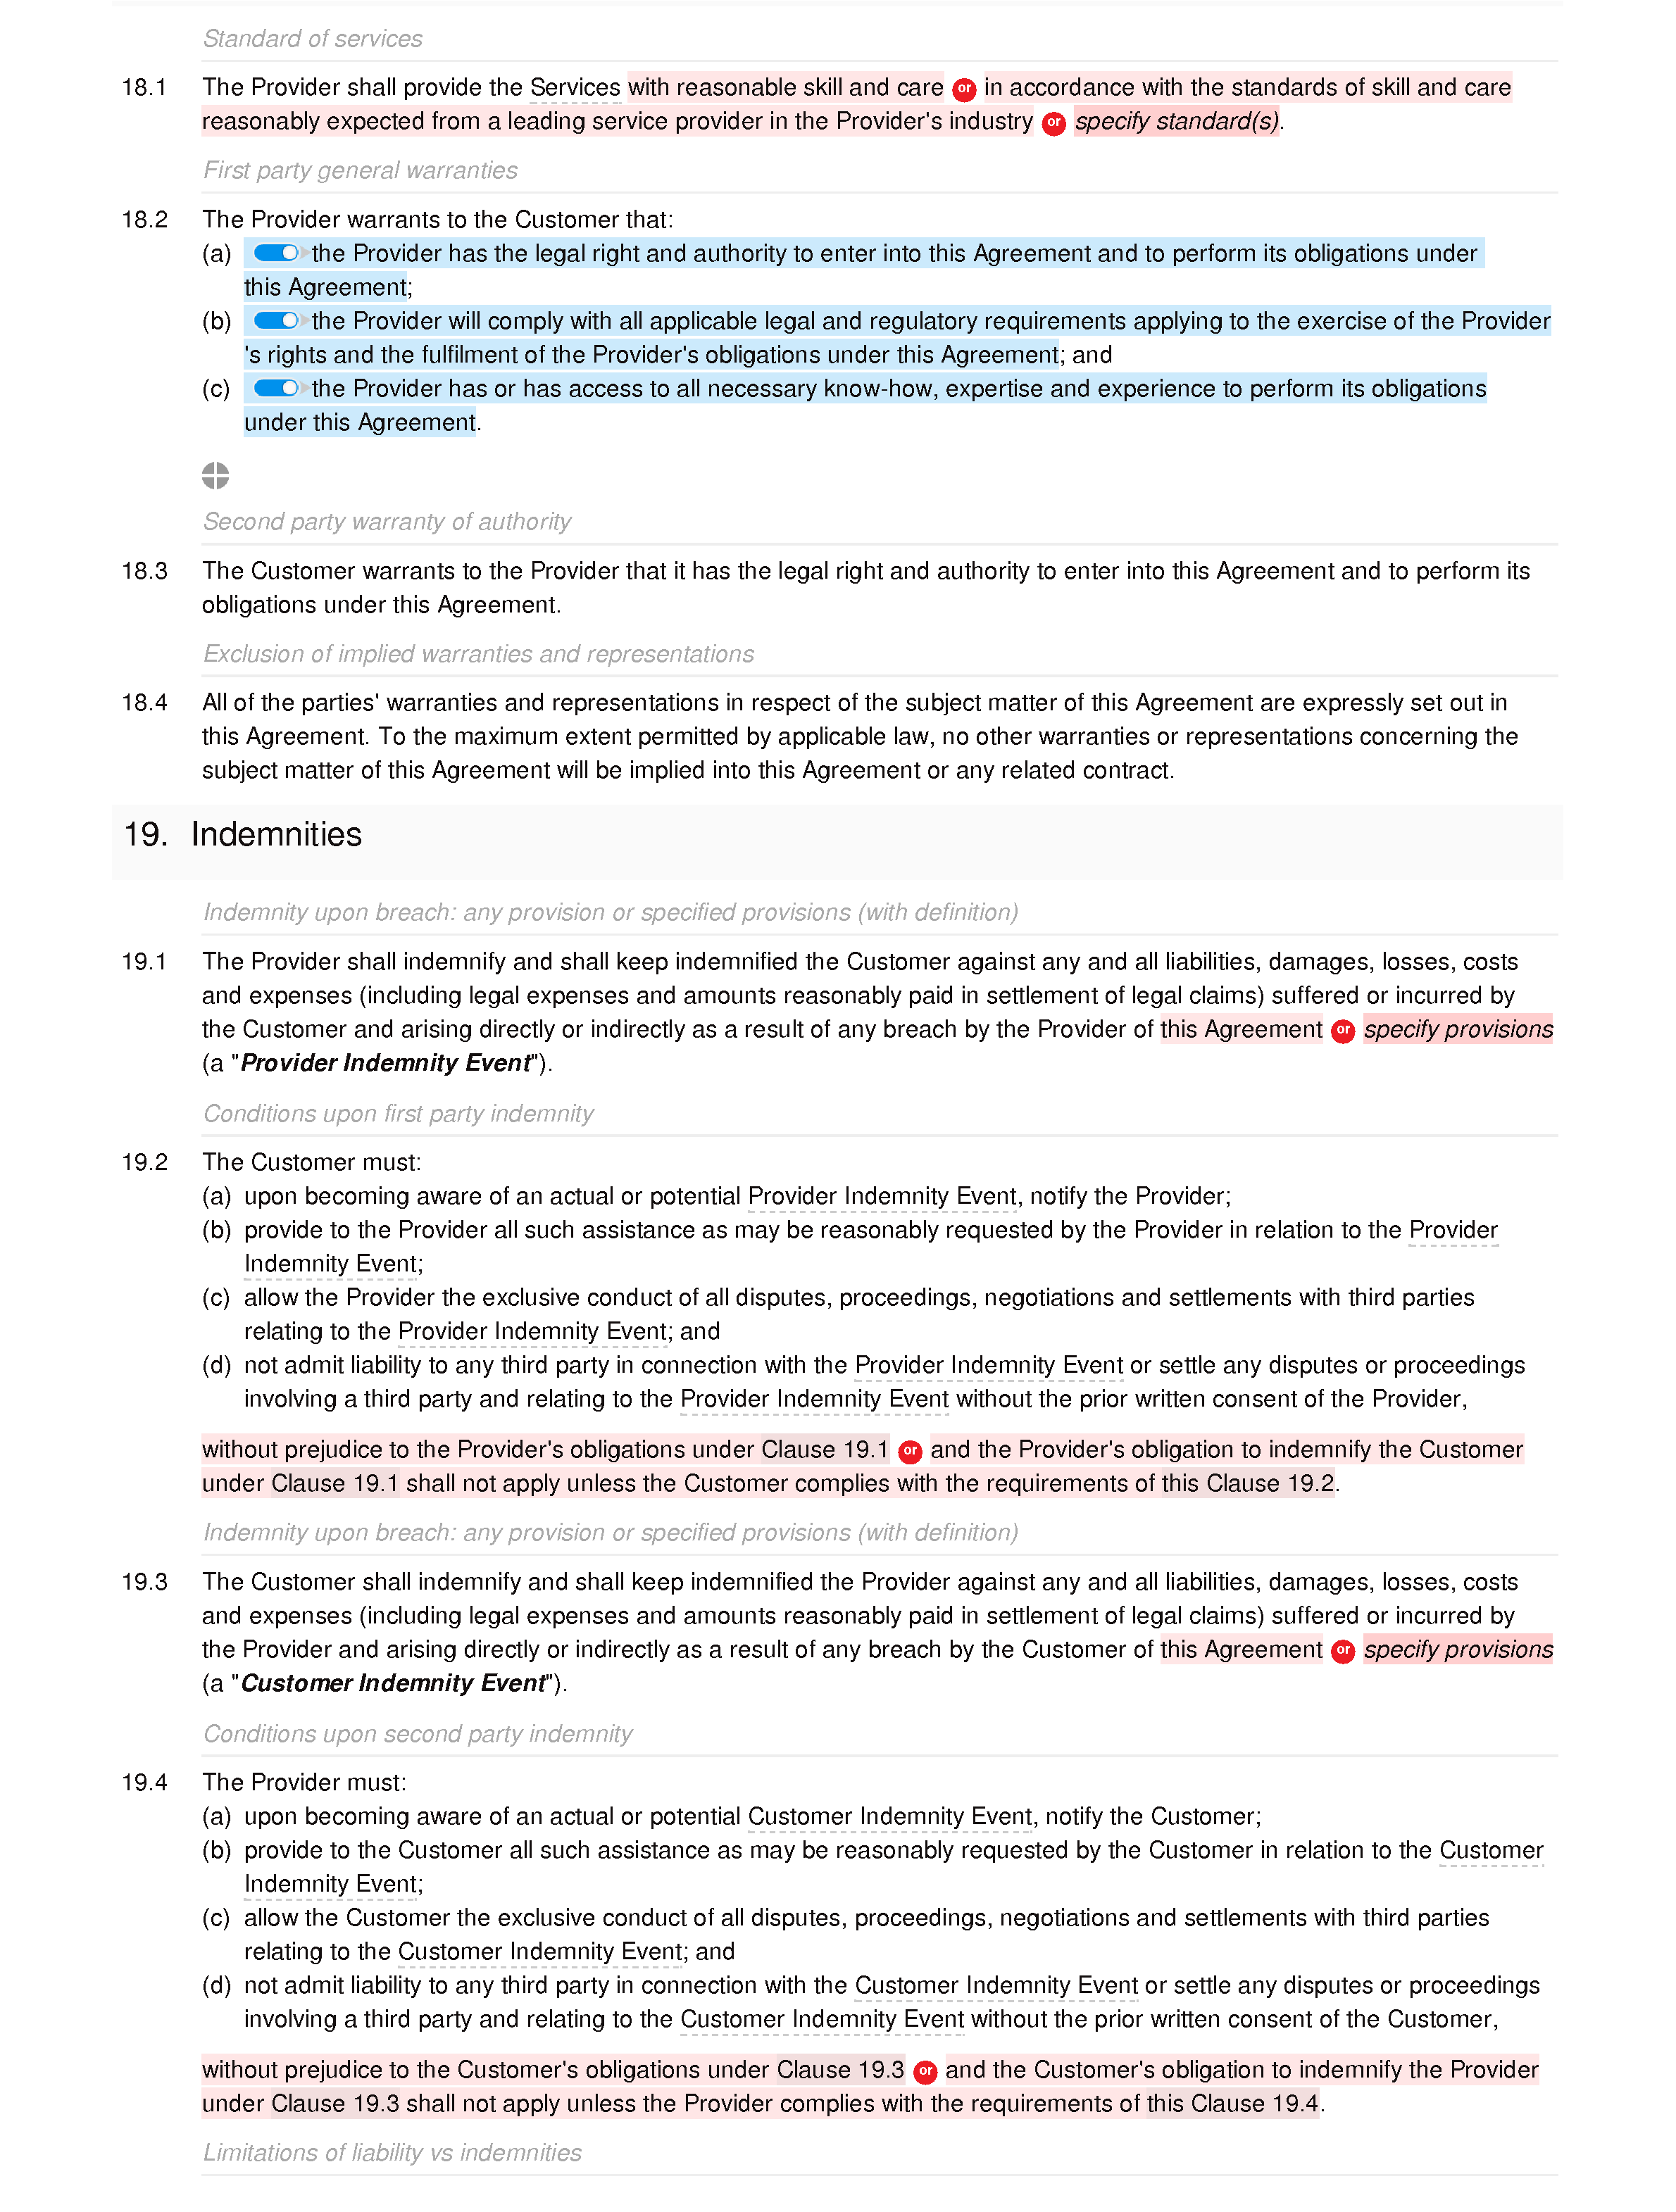 Web services agreement document editor preview